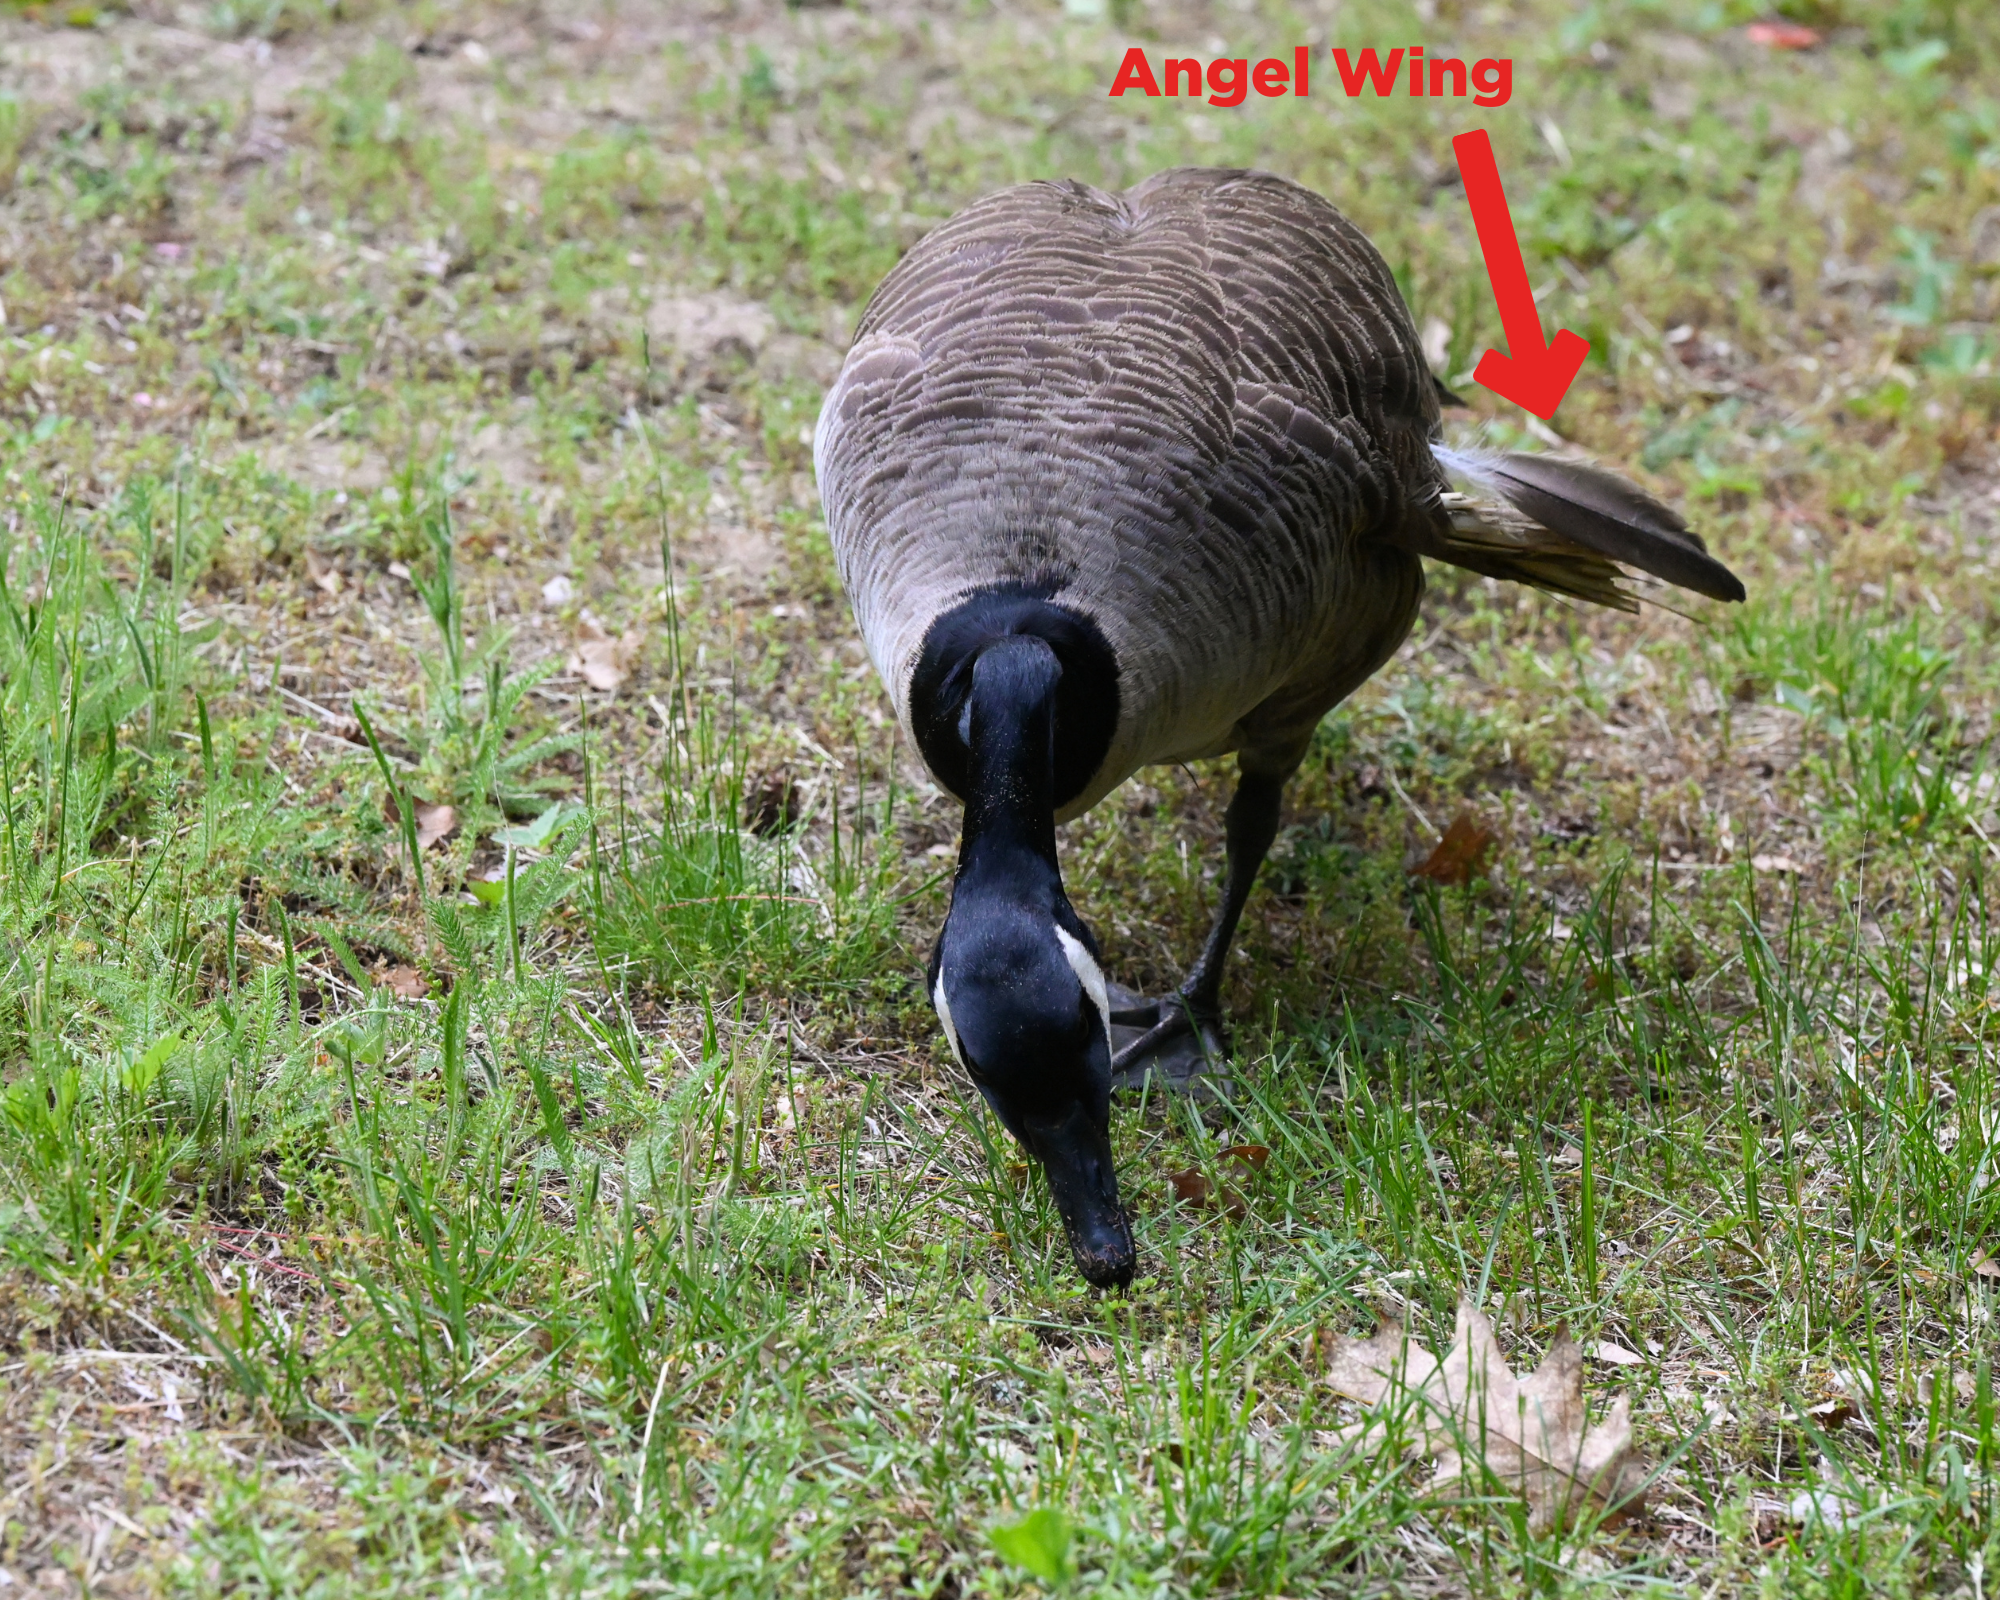 Canada goose with angel wing